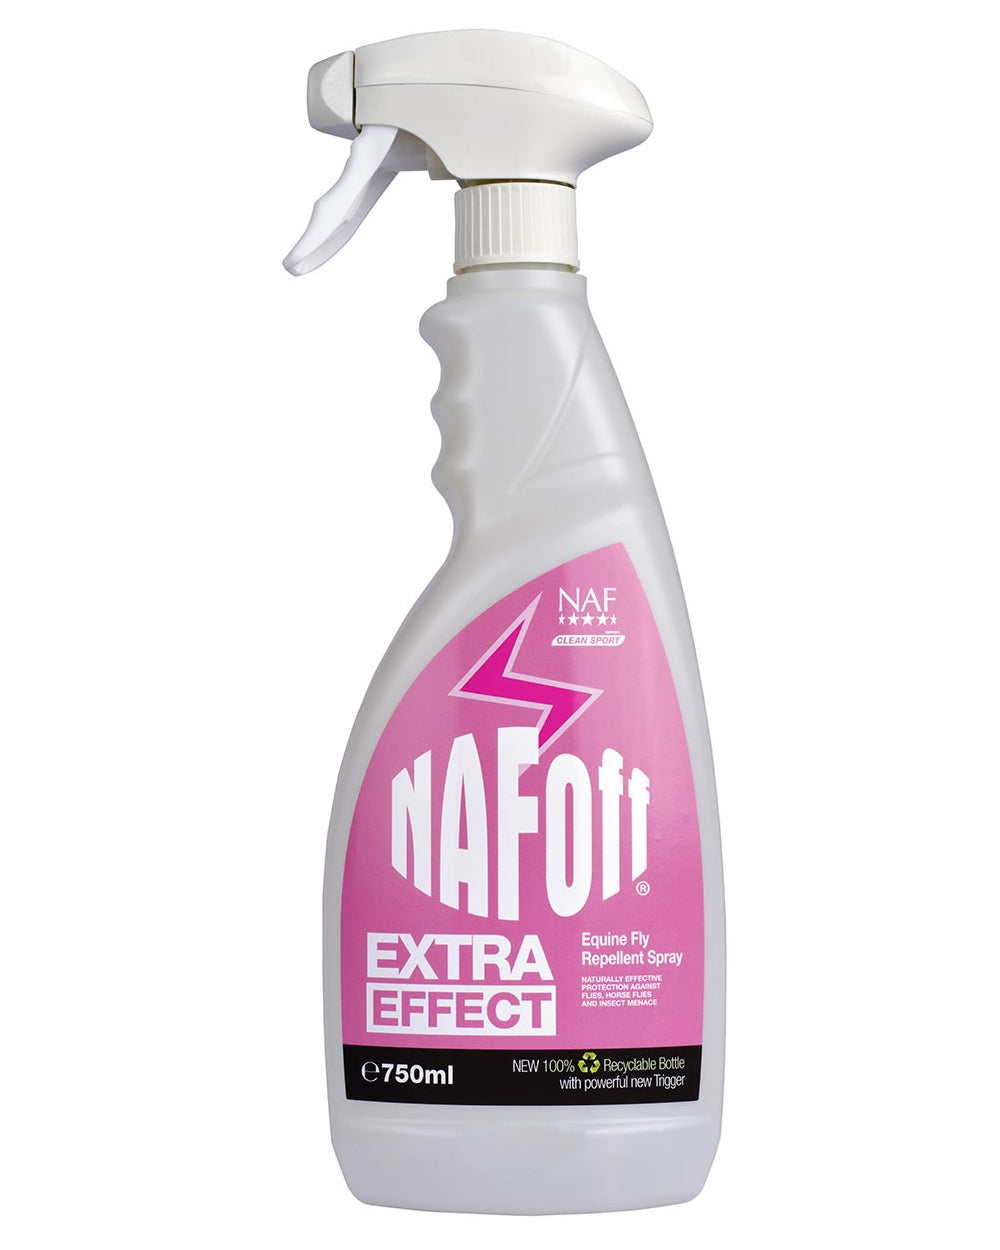 NAF Off Extra Effect 750ml on white background